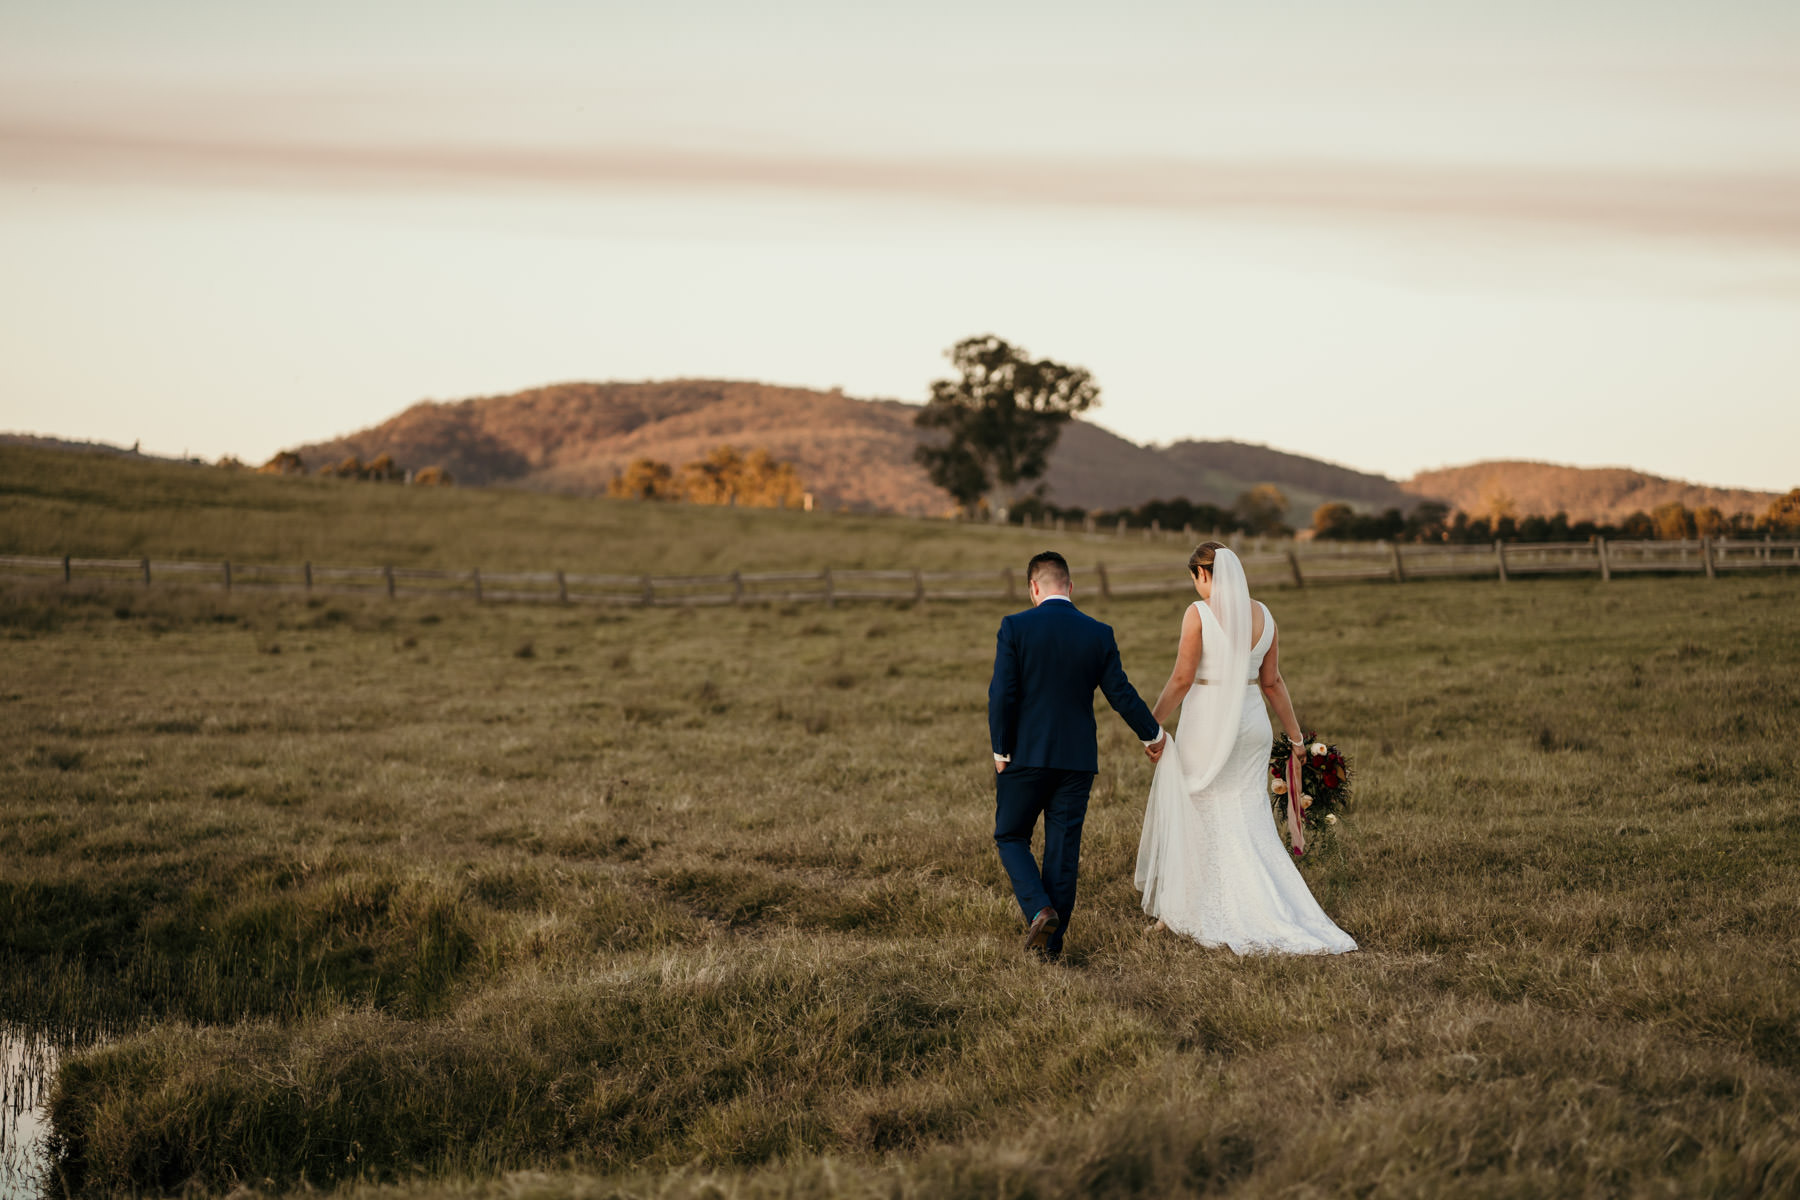 107Hunter Valley Wedding Photographers Bryce Noone Photography at Tocal Homestead Wedding Venue.jpg